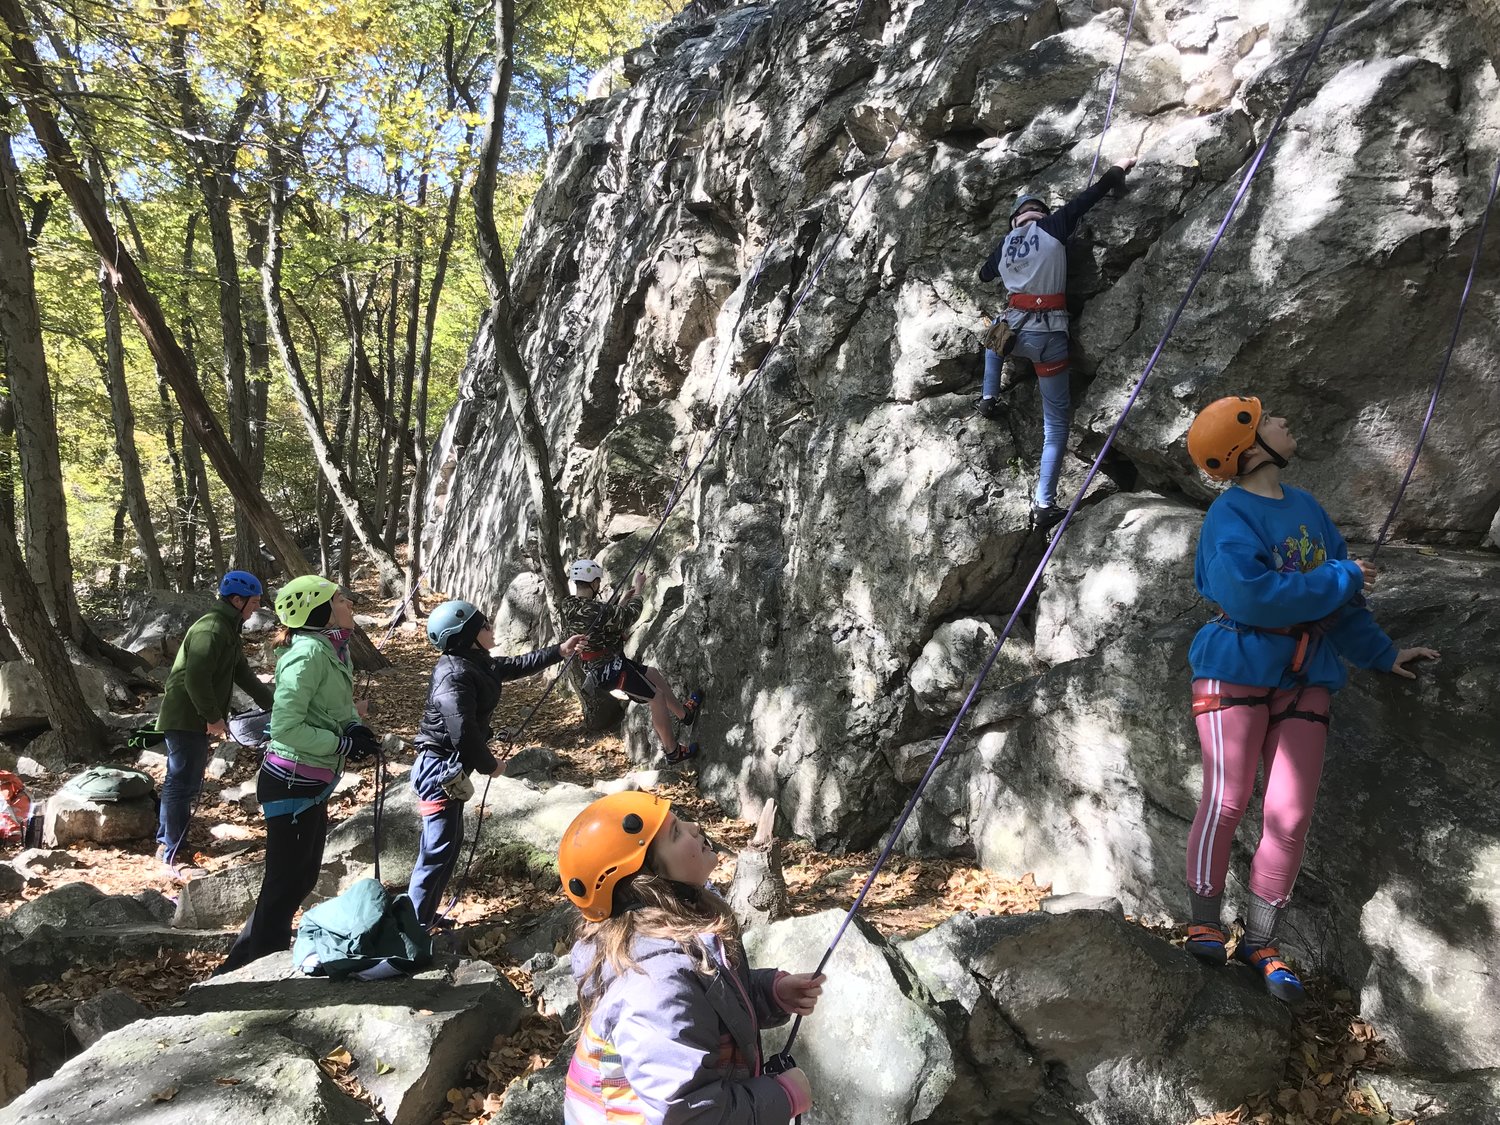 Rock Climbing in White Rocks, South Central PA